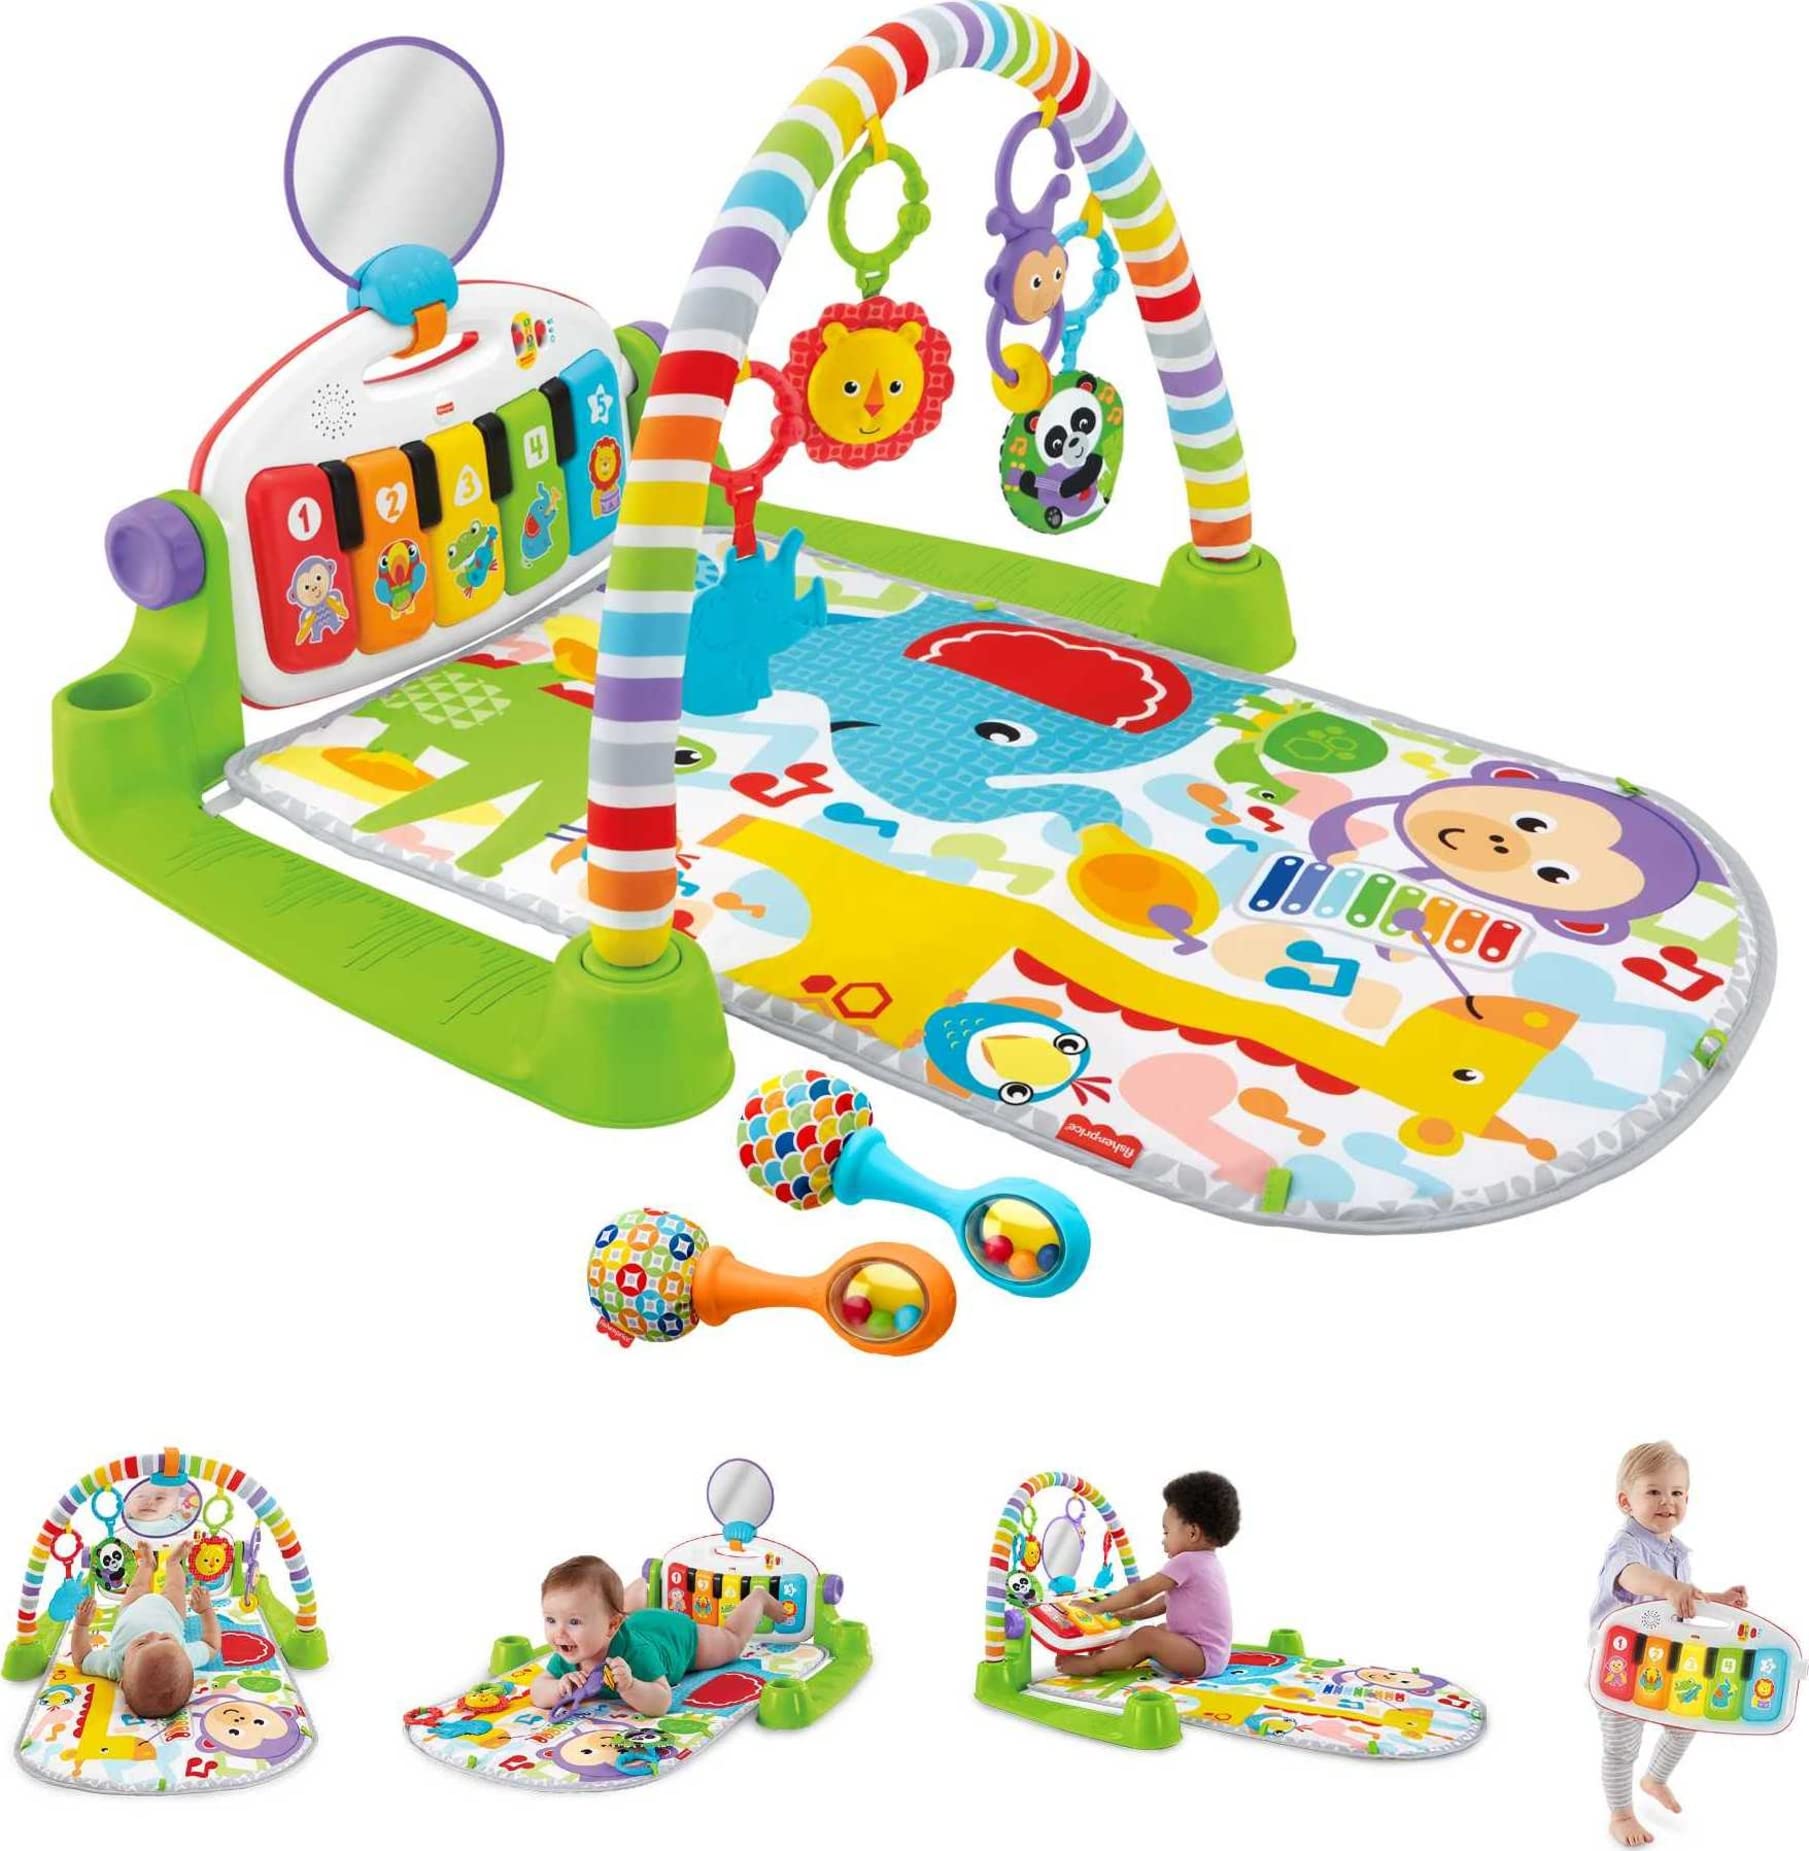 Fisher-Price Baby Playmat Deluxe Kick & Play Piano Gym & Maracas with Smart Stages Learning Content,5 Linkable Toys & 2 Soft Rattles (Amazon Exclusive)